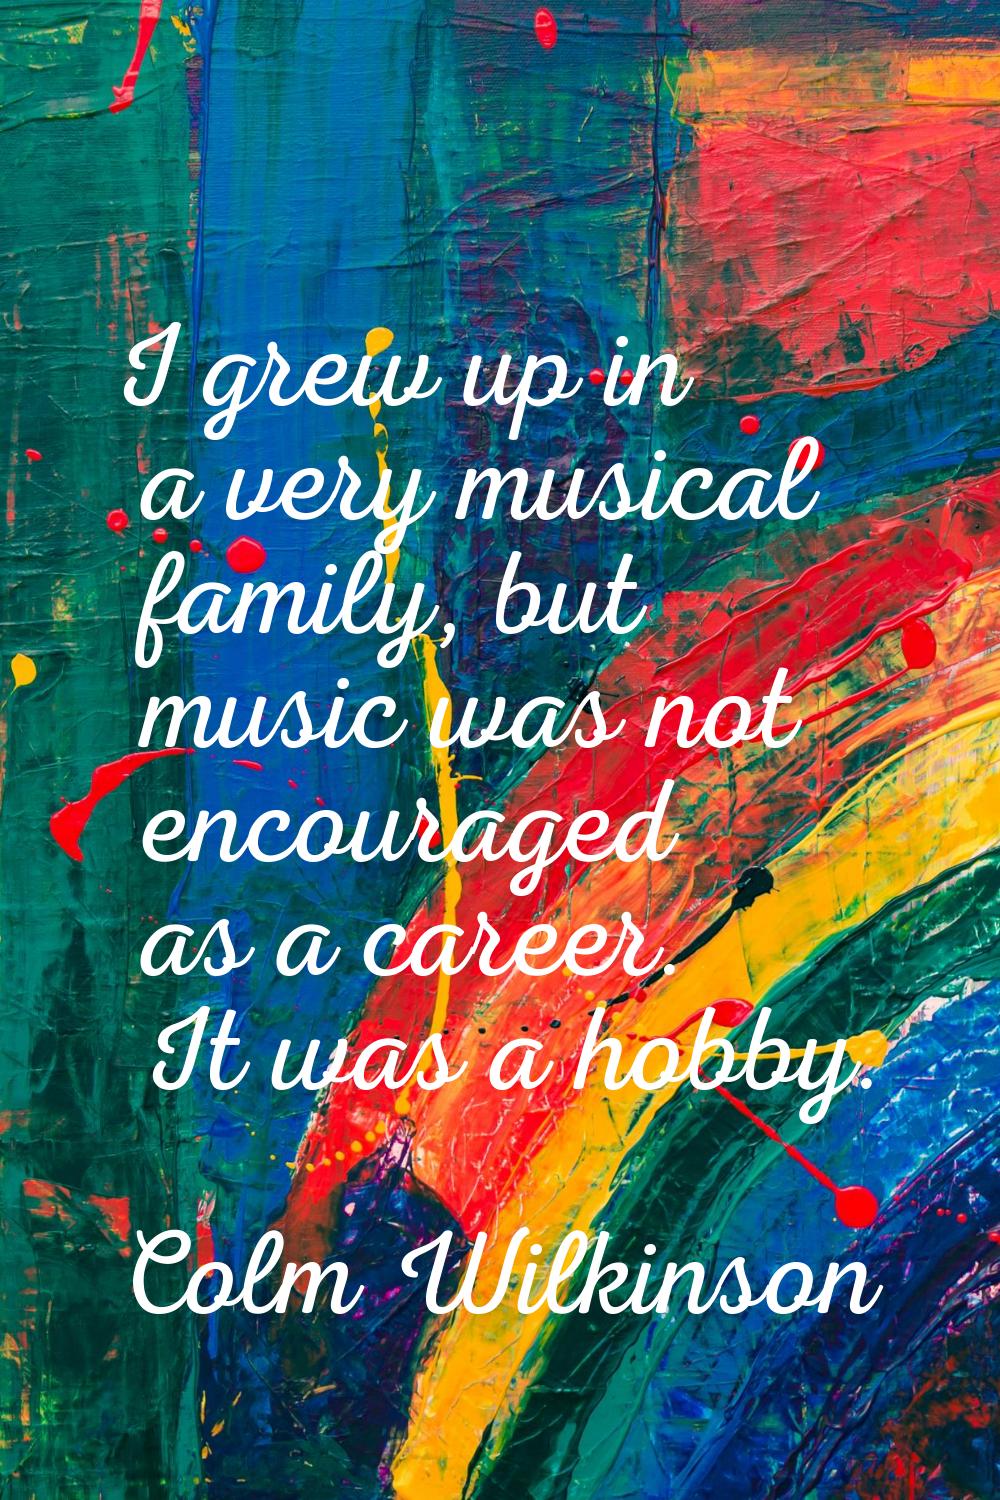 I grew up in a very musical family, but music was not encouraged as a career. It was a hobby.